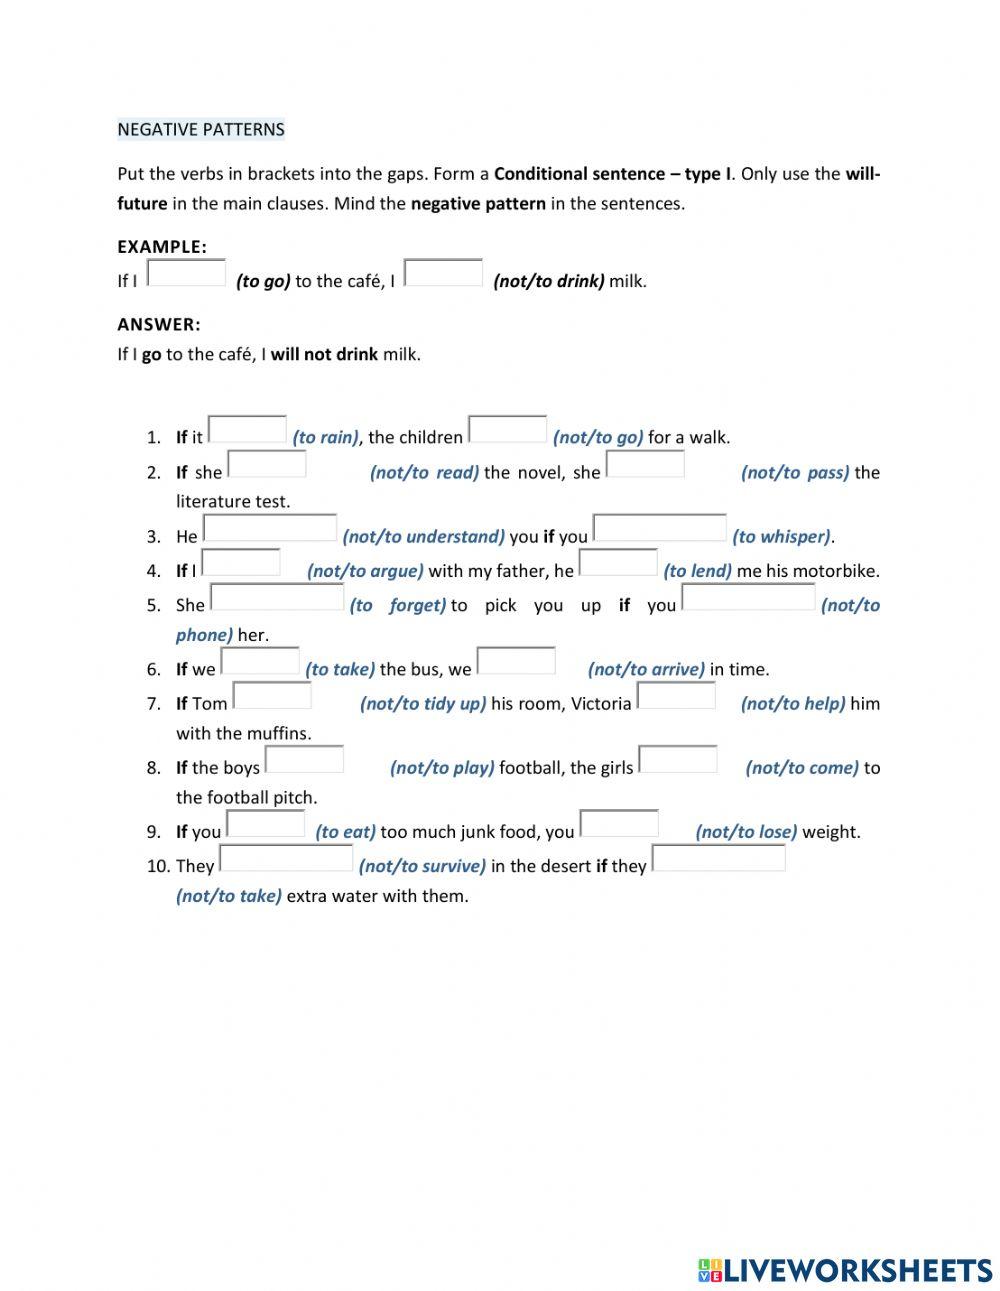 Conditional sentence type 1 exercise